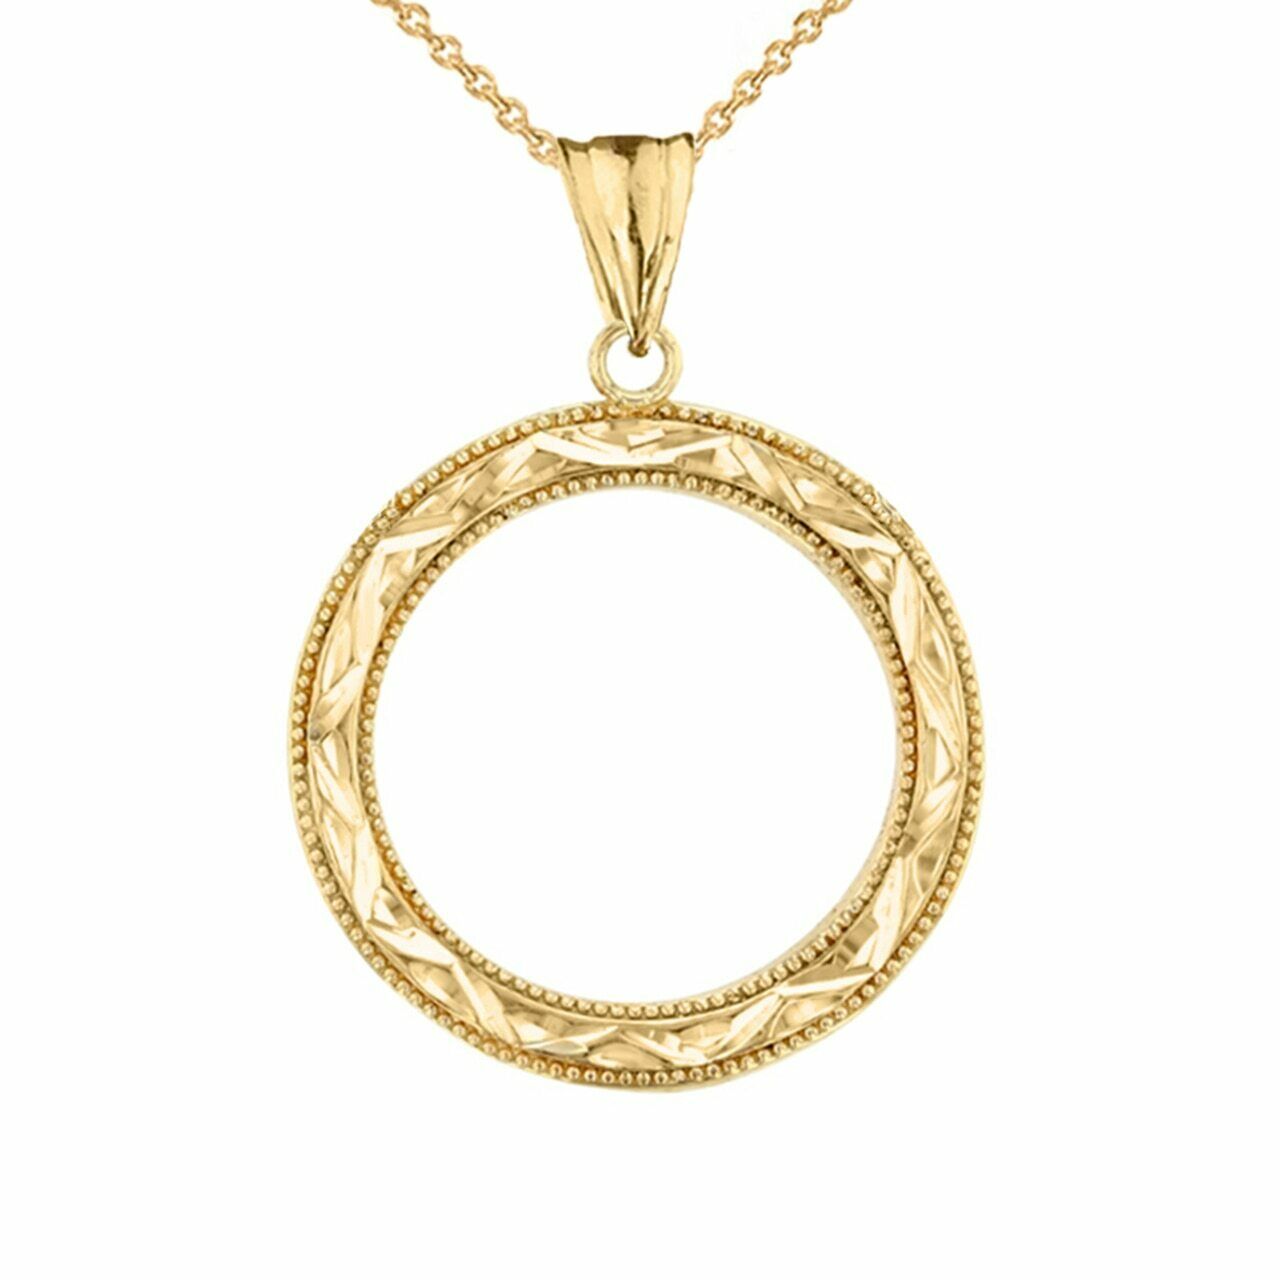 Solid 10k In Yellow Gold Chic Sparkle Cut Circle Of Life Pendant Necklace